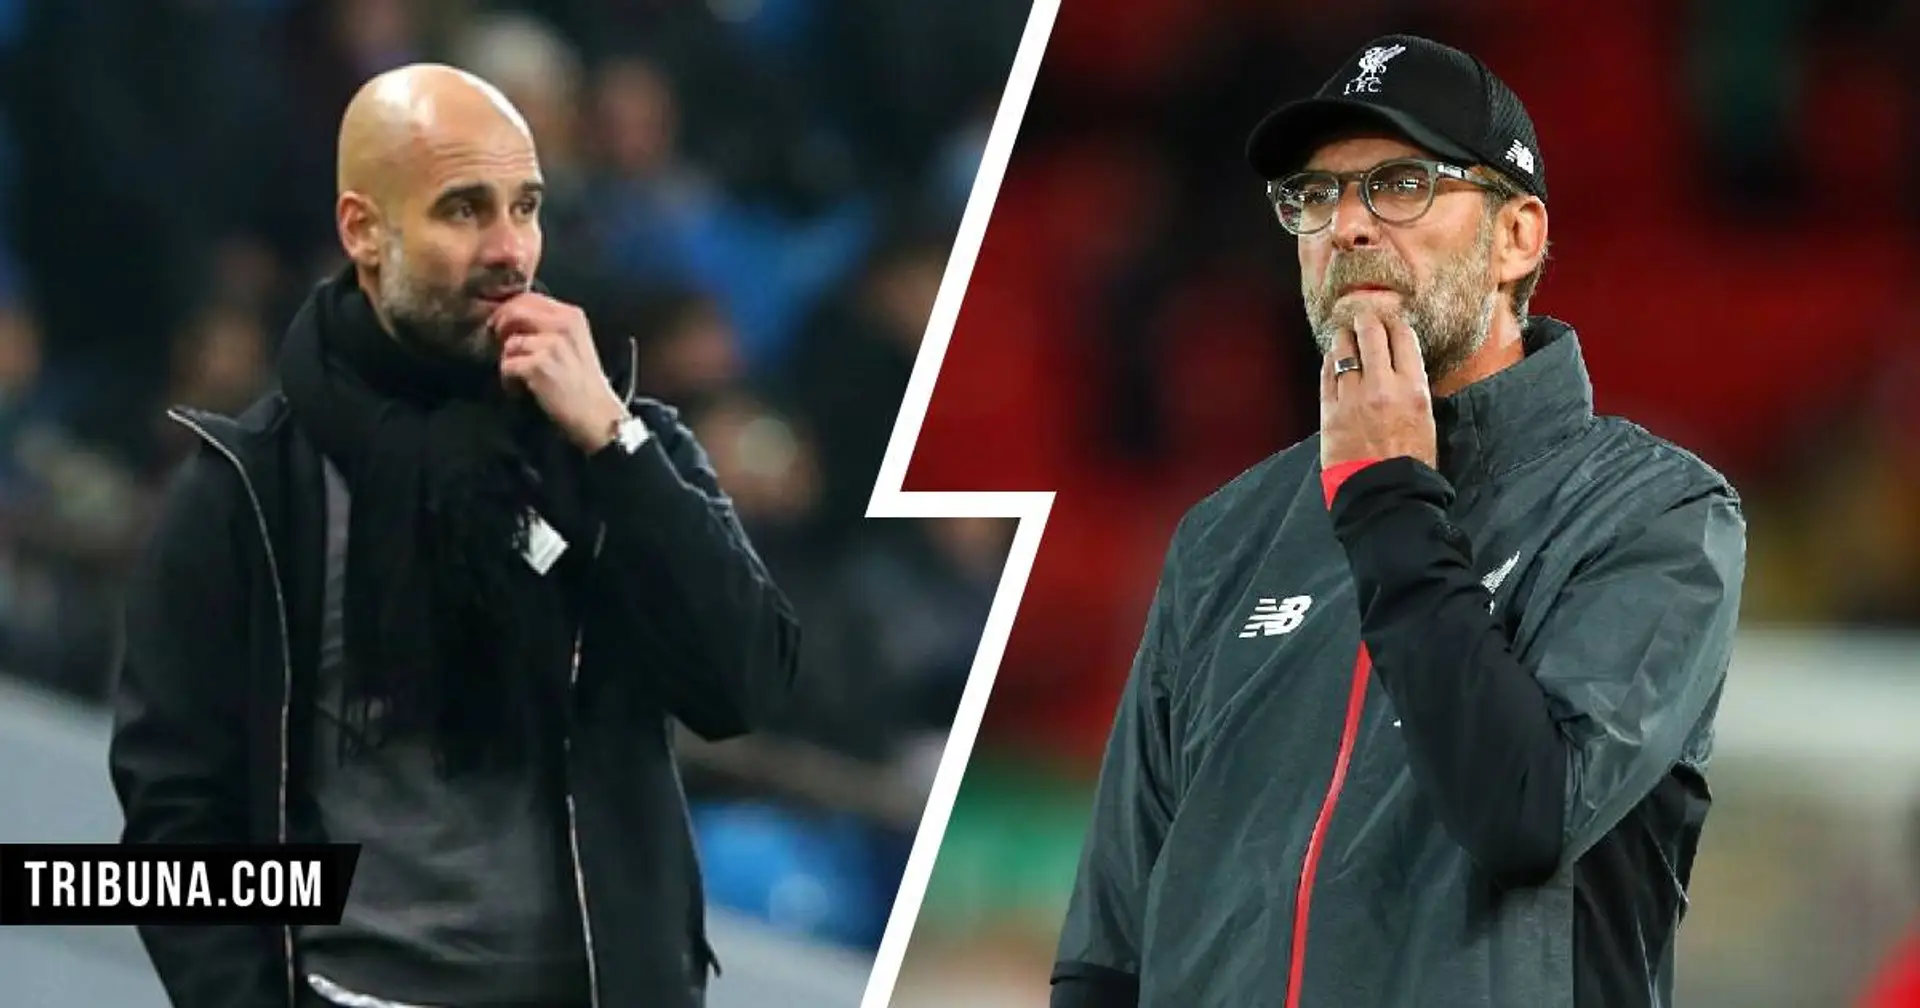 No Van Dijk, drop in attacking quality: Rival fans detail how Liverpool's issues are comparable to Man City's last year